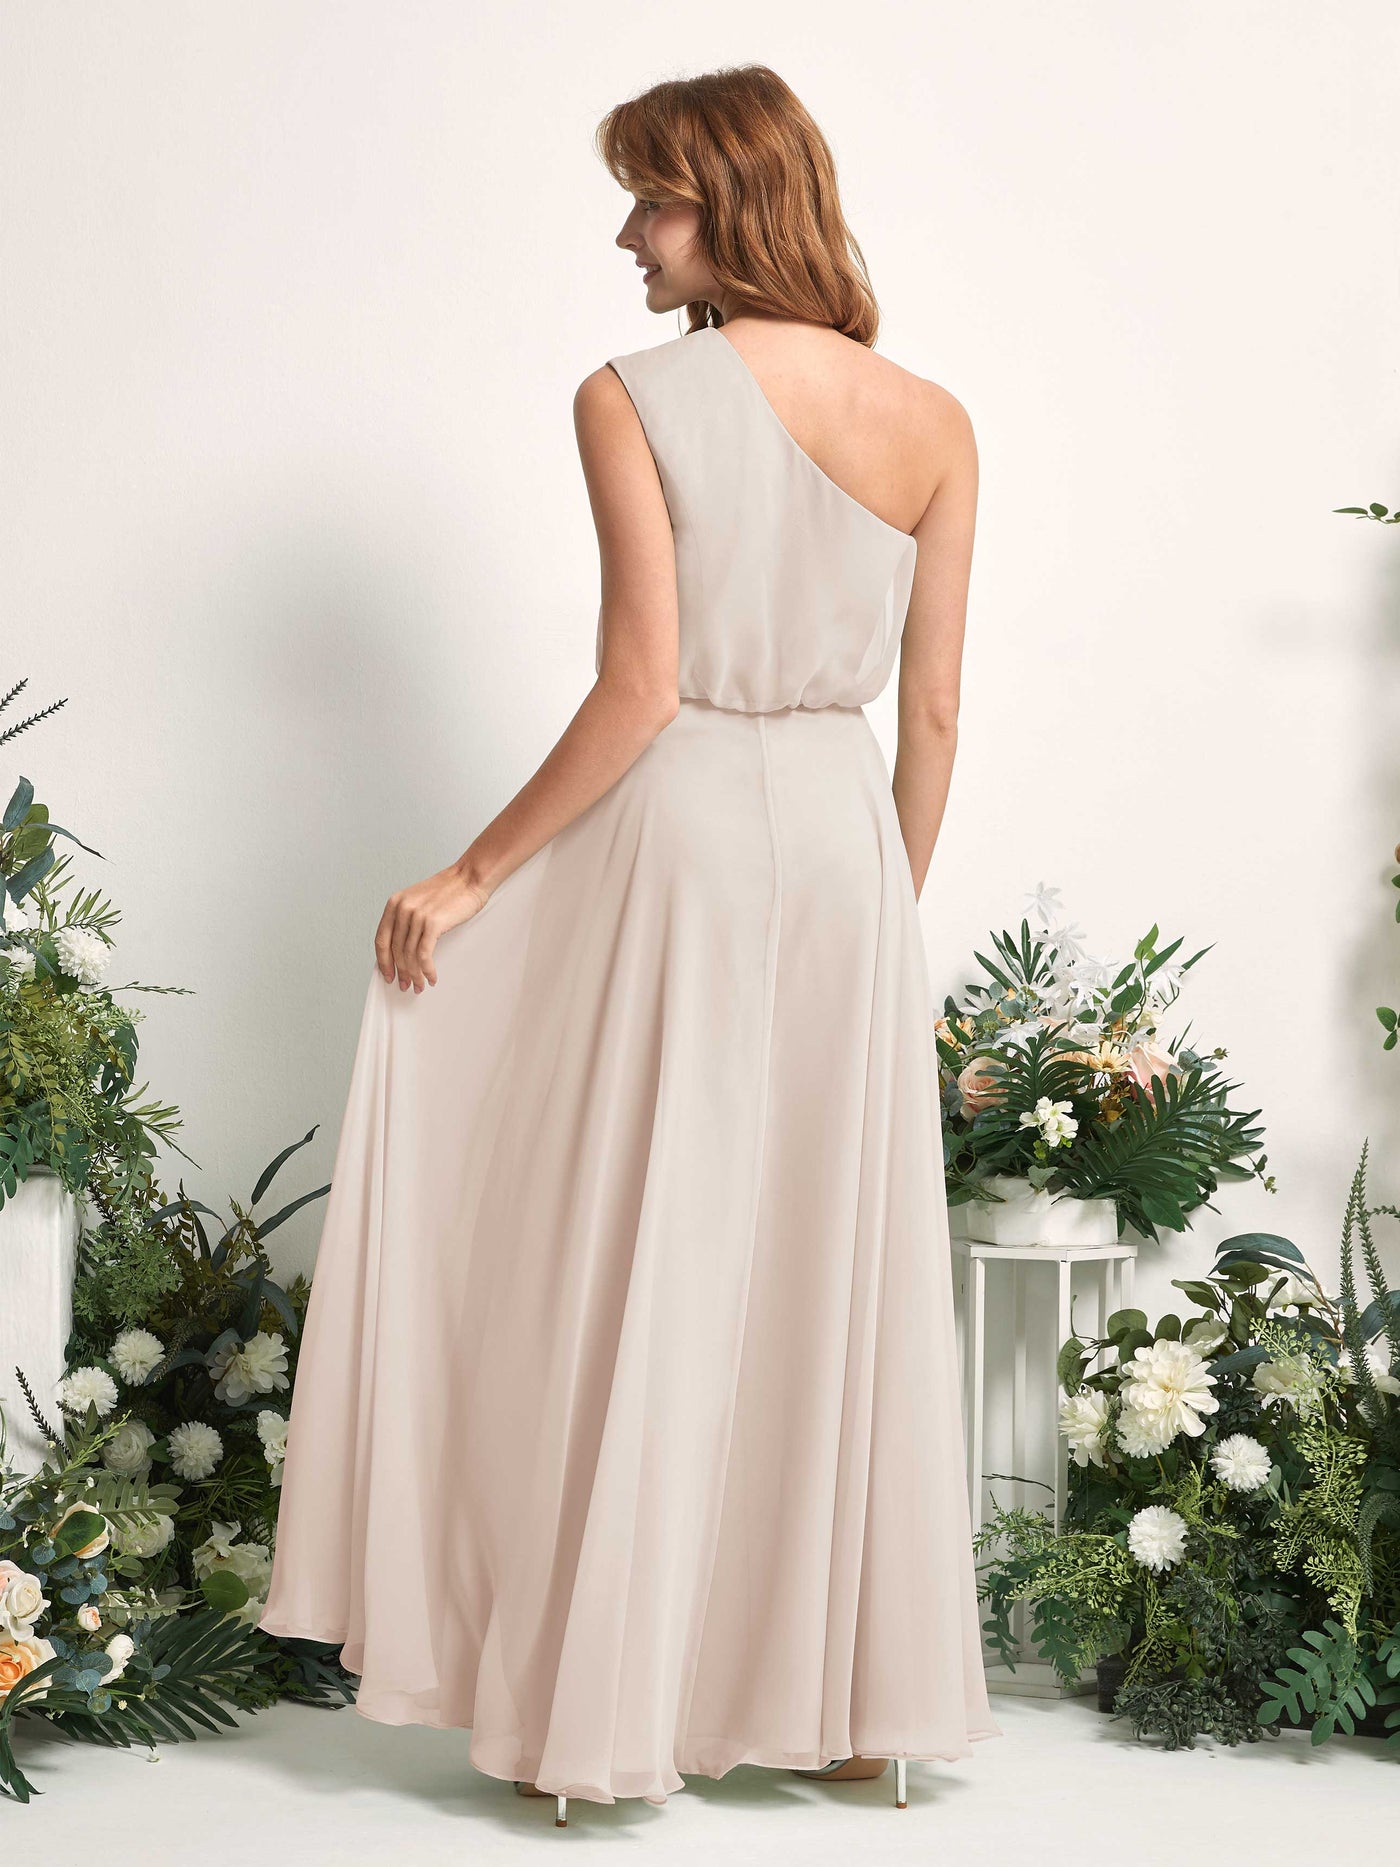 Bridesmaid Dress A-line Chiffon One Shoulder Full Length Sleeveless Wedding Party Dress - Champagne (81226816)#color_champagne